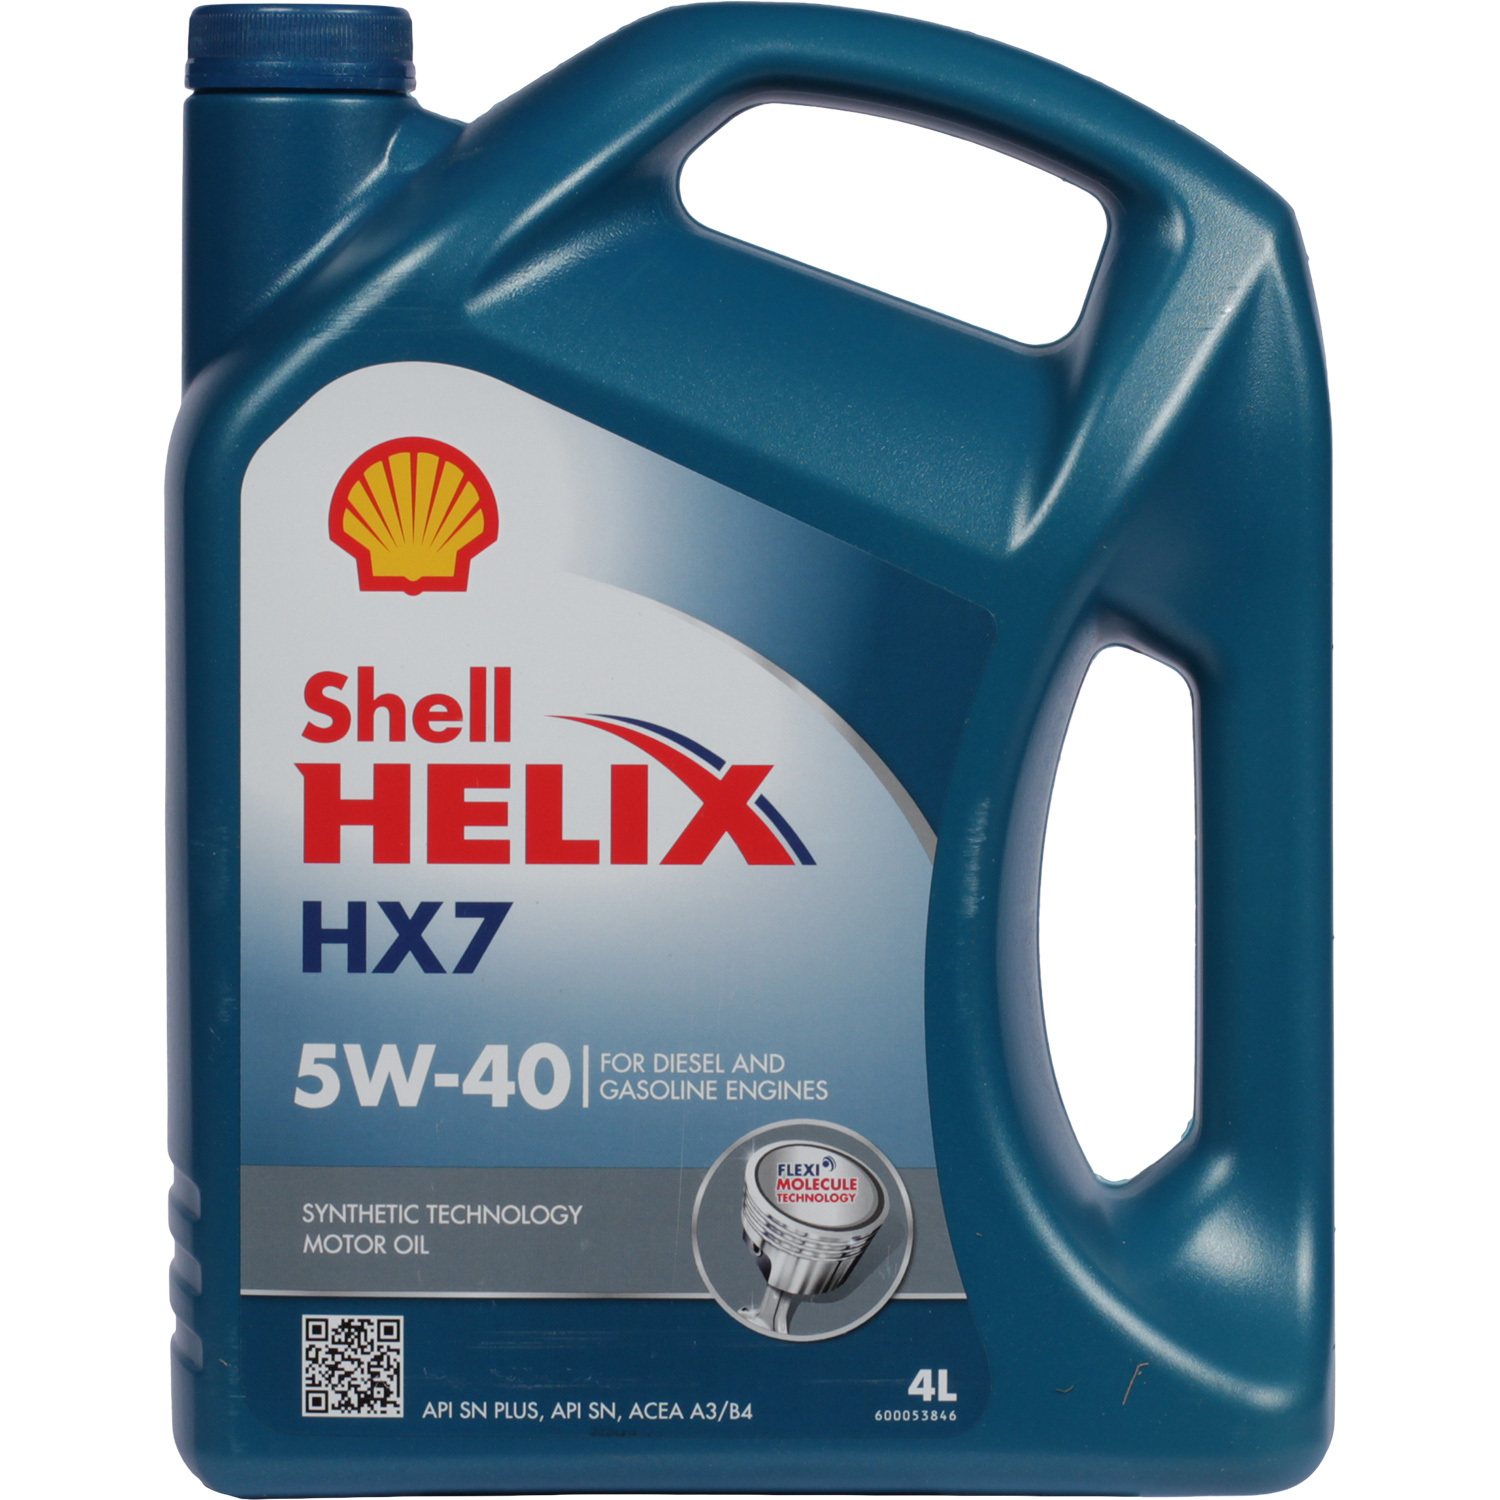 Shell Моторное масло Shell Helix HX7 5W-40, 4 л масло моторное shell helix ultra 5w 40 1 л